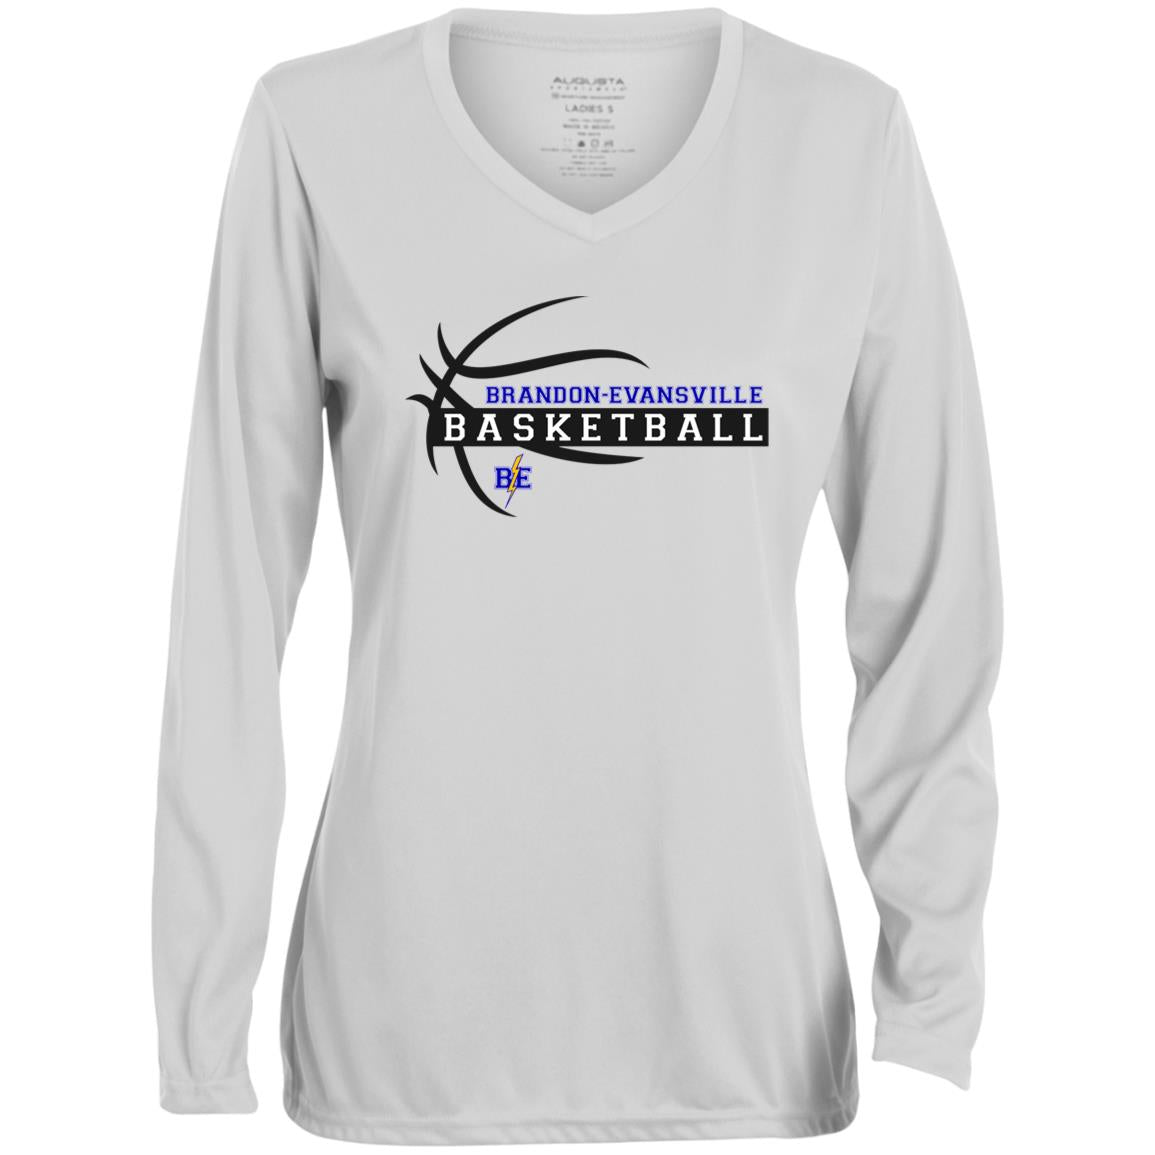 Chargers Basketball - Ladies' Moisture-Wicking Long Sleeve V-Neck Tee